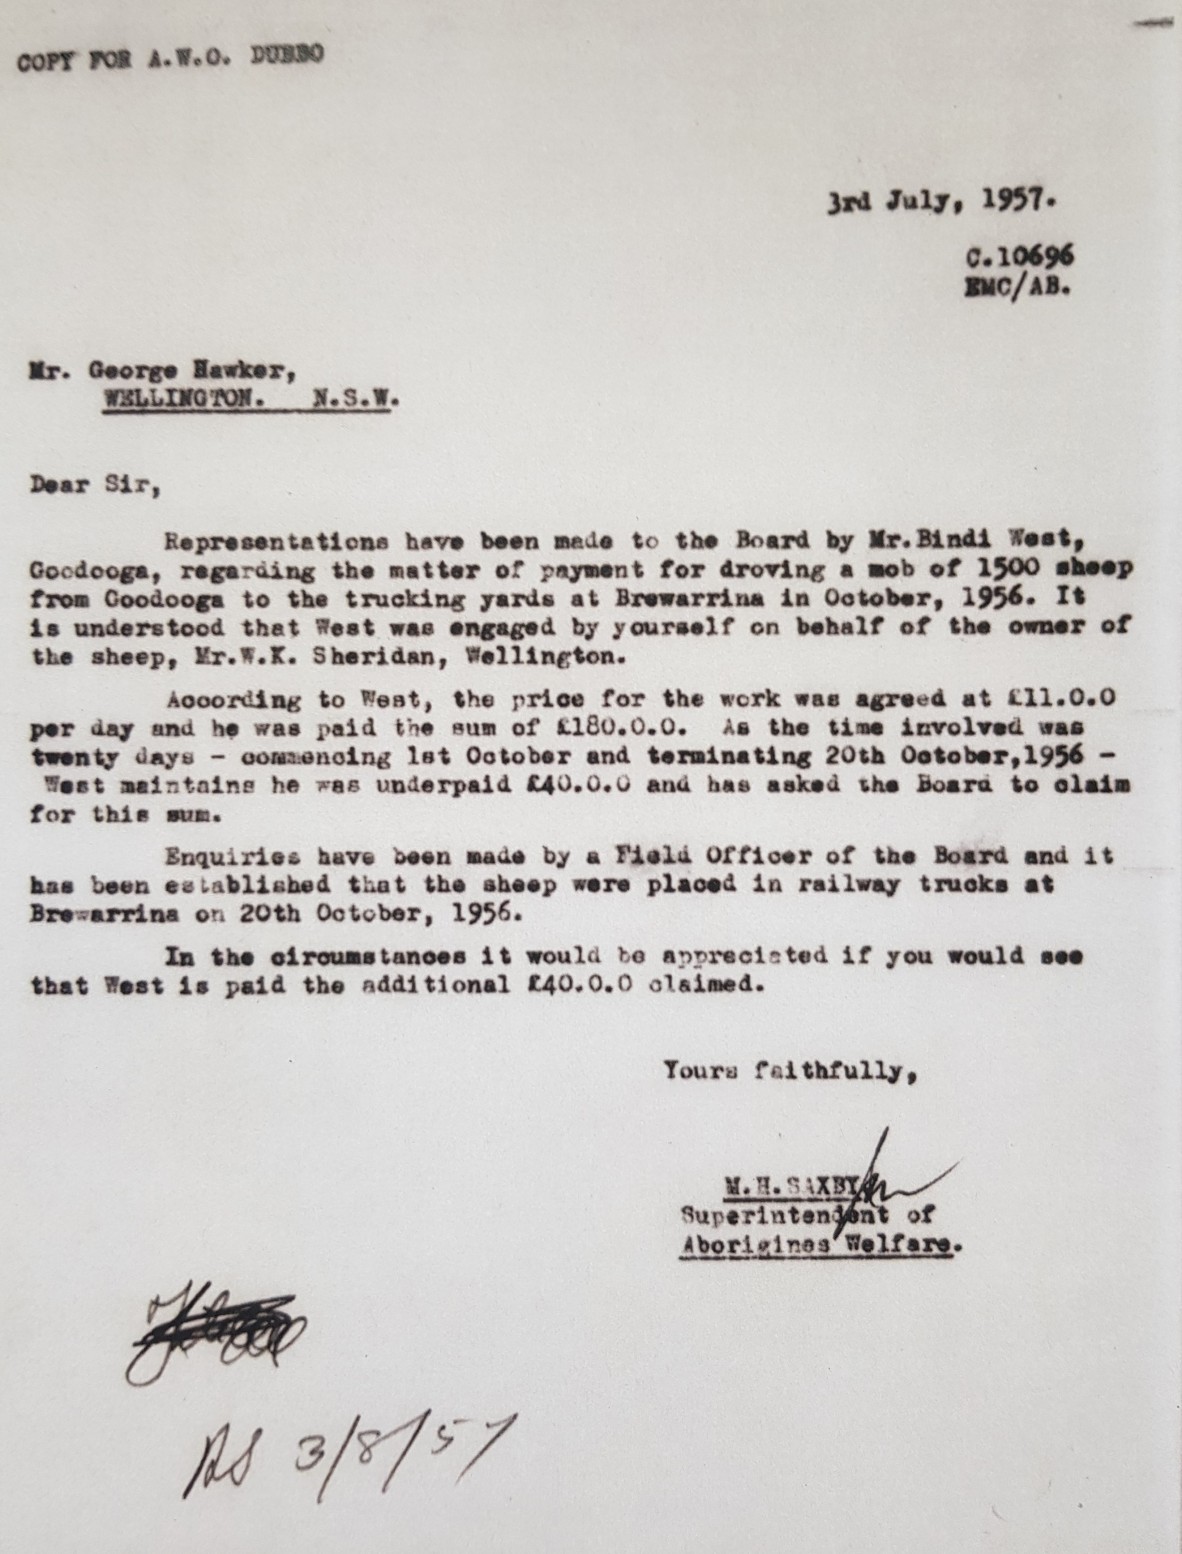 Saxby then writes to George Hawker the stock agent on 3rd Jul 1957, regarding the agreed amount for the droving contract. Saxby writes ’it would be appreciated if you would see that West is paid the additional 40 pound’.